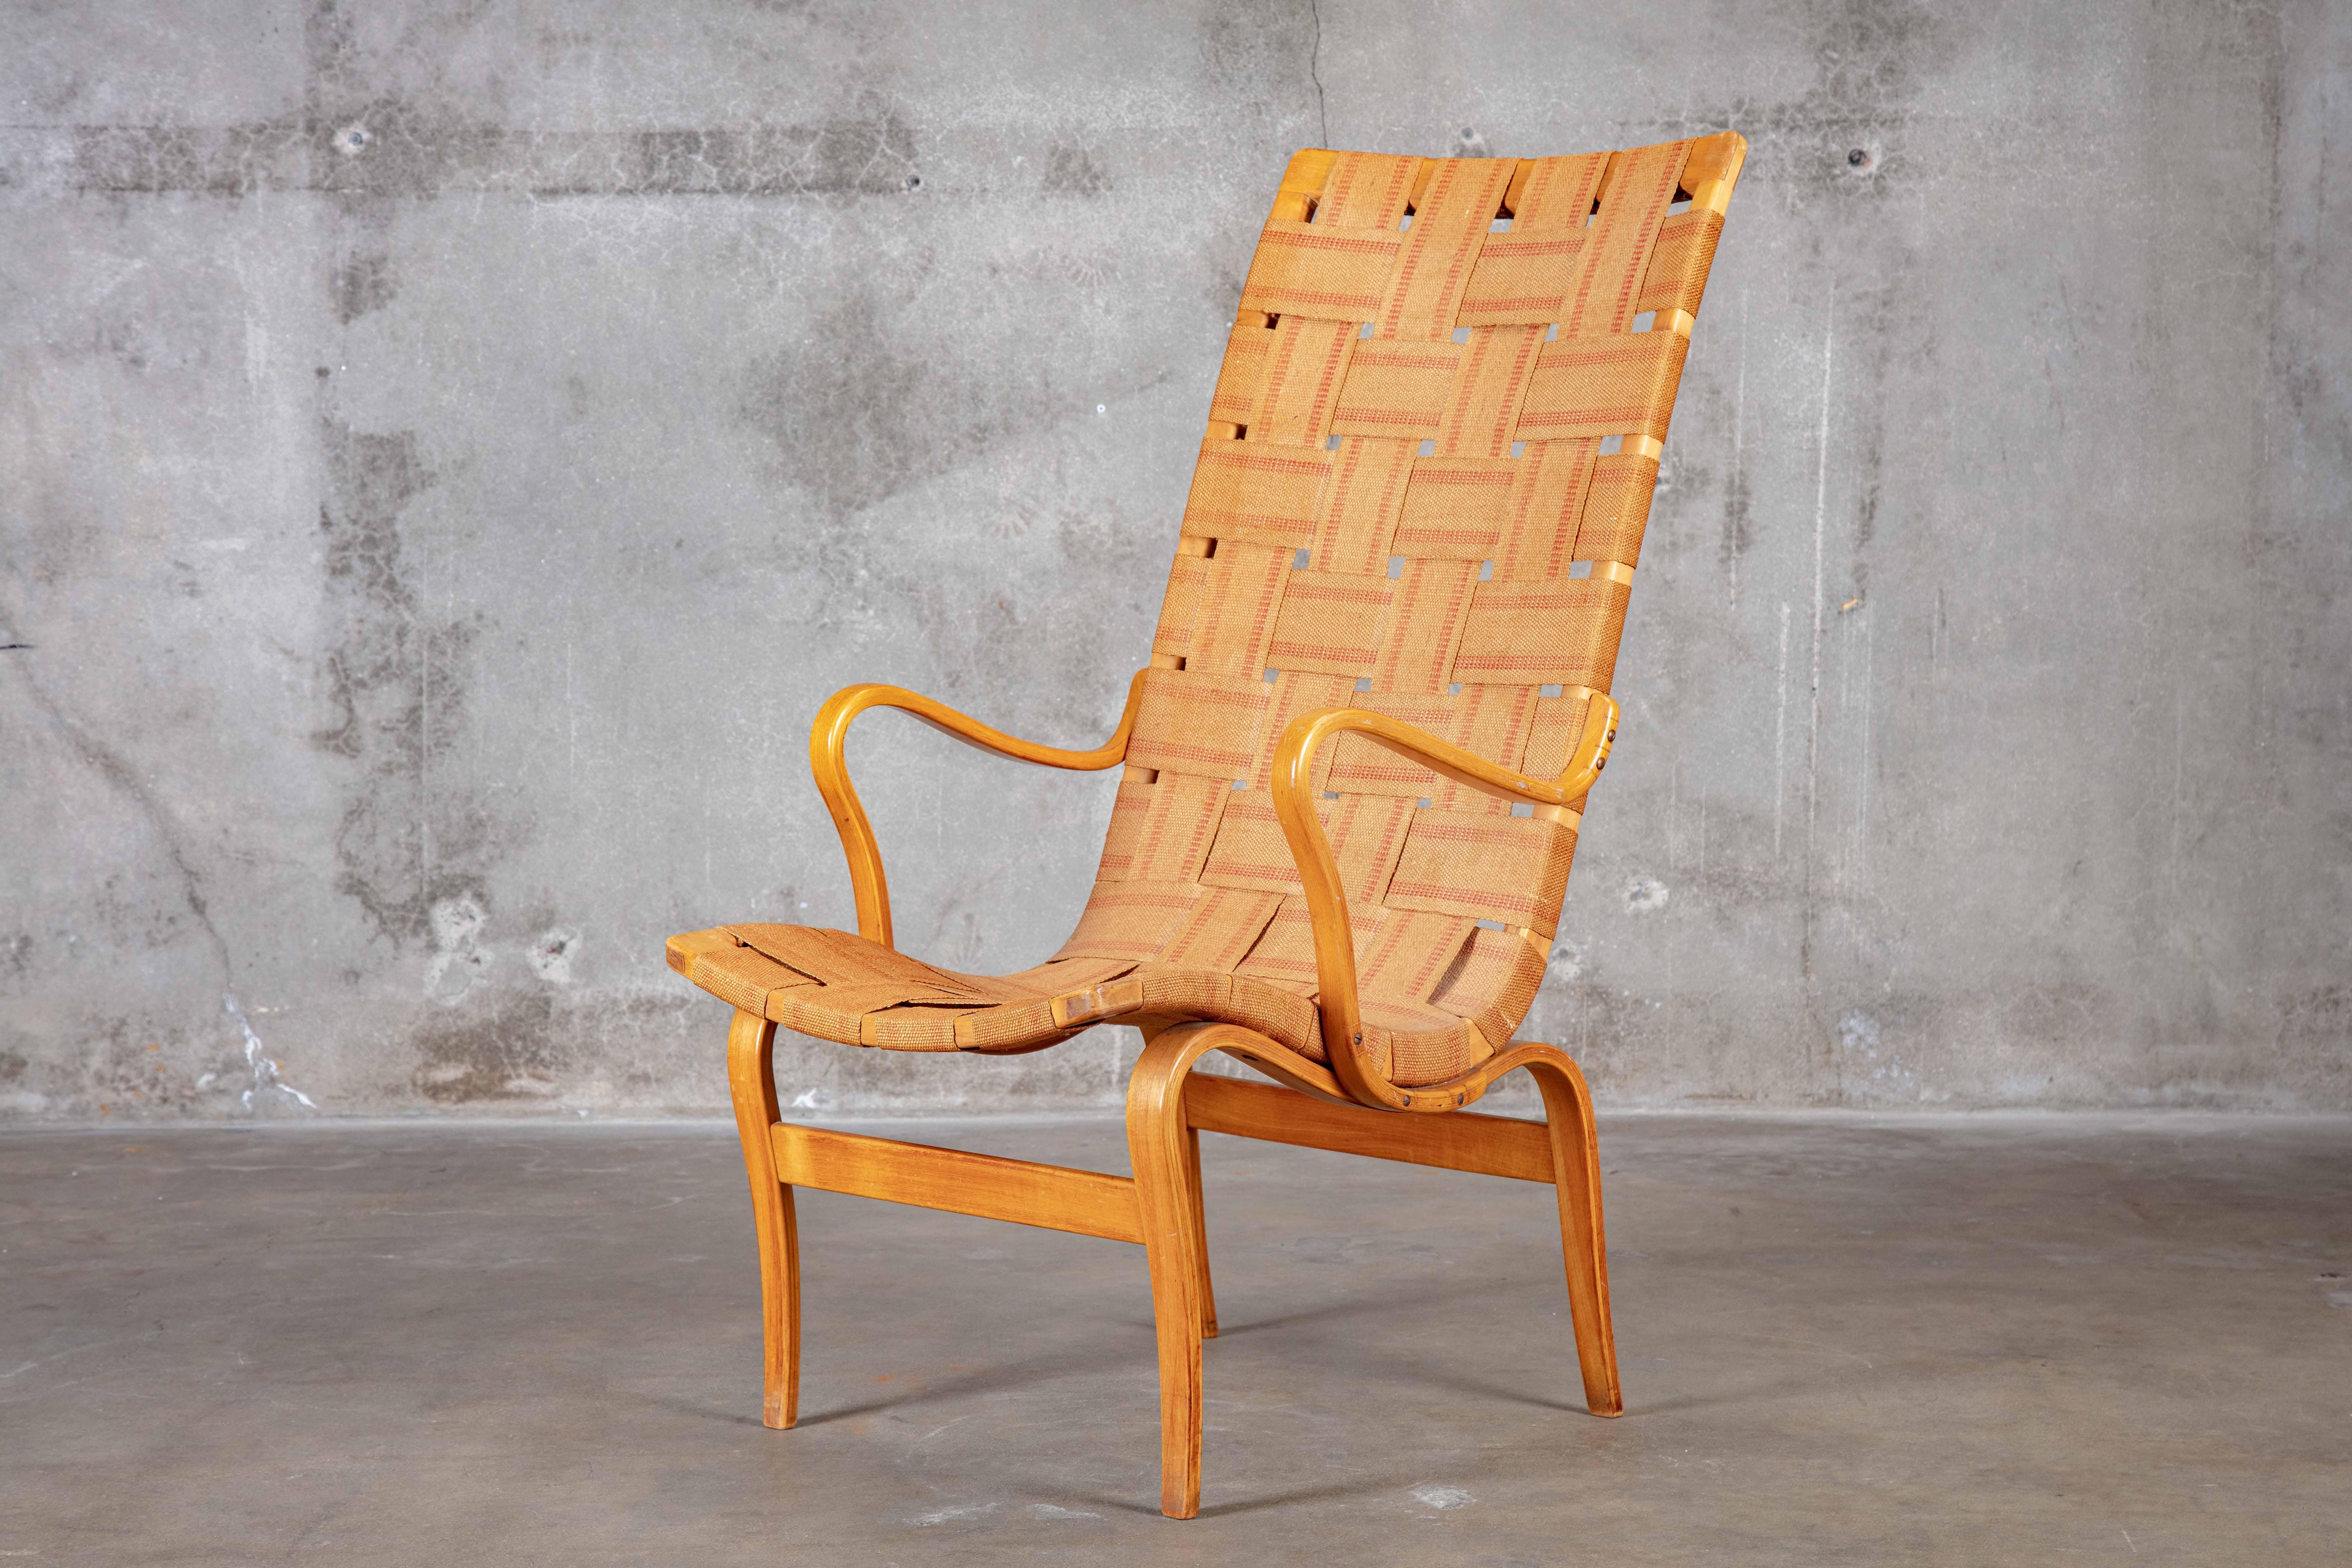 Bruno Mathsson (Swedish 1907-1988) Pernilla highback lounge chair produced by Karl Mathsson.

Measures: Seat height 17 inches

Arm height 24.5 inches.